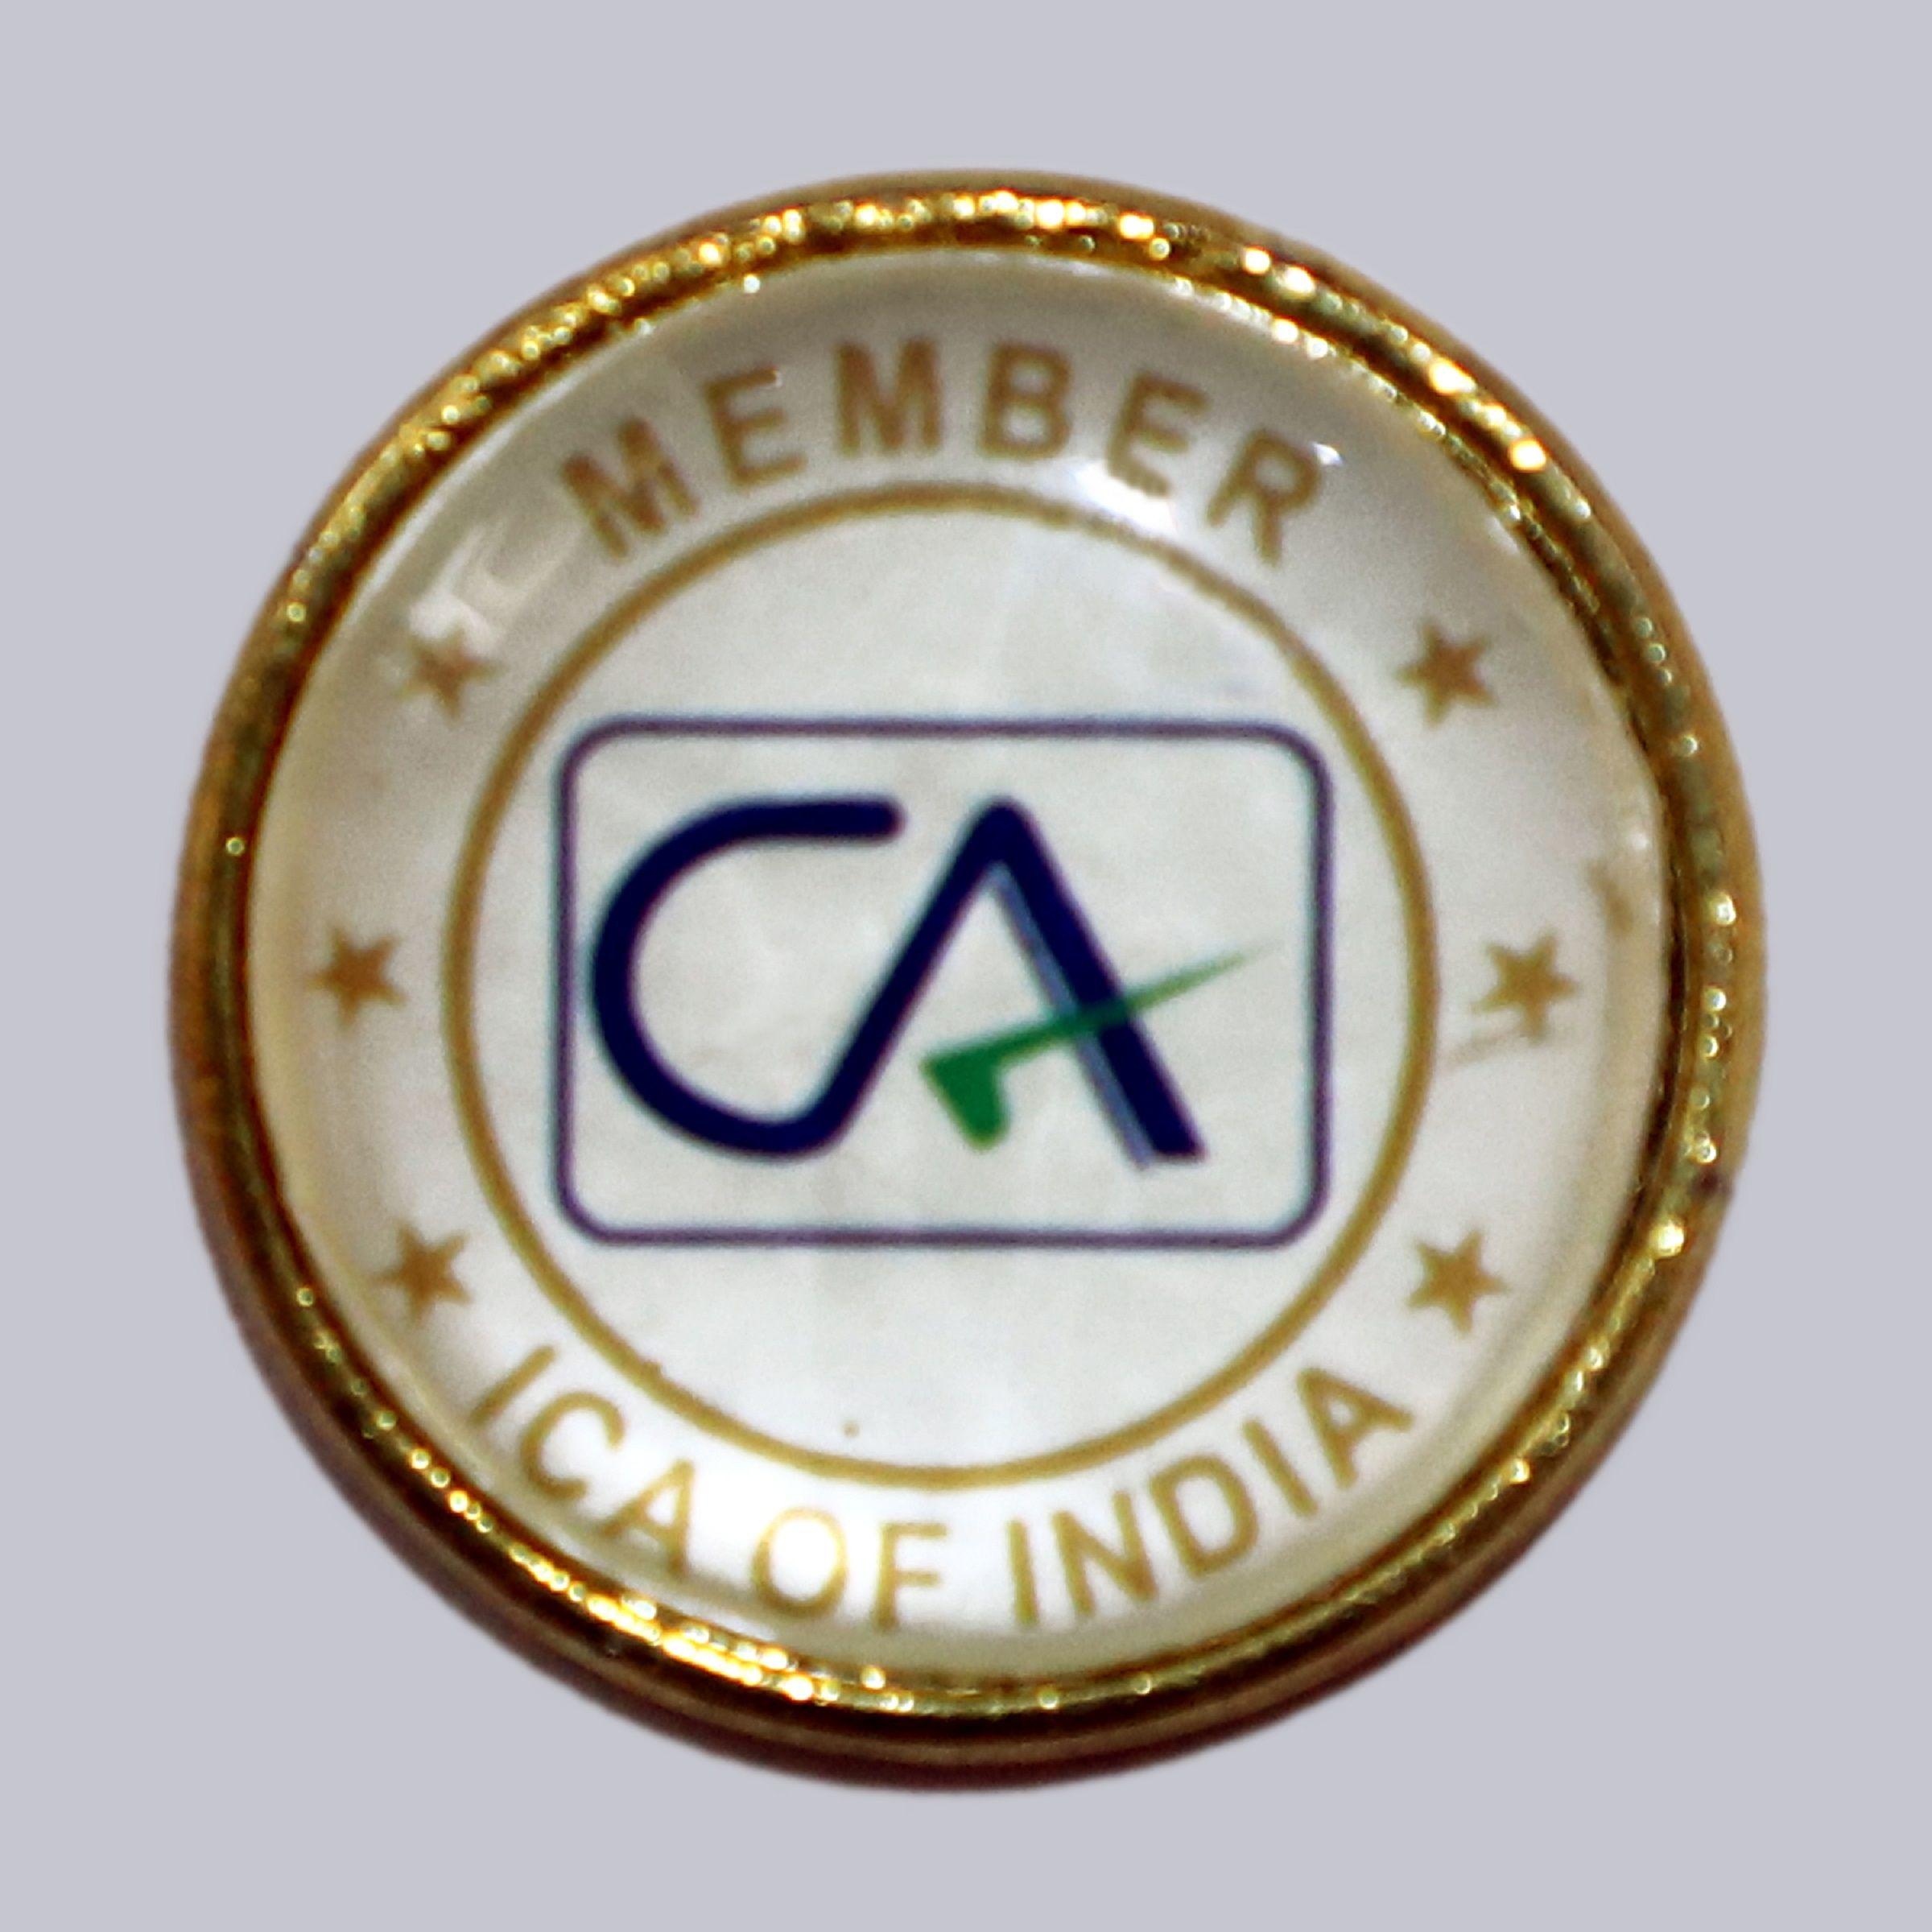 ICAI Logo - Home. The Institute of Chartered Accounts of India